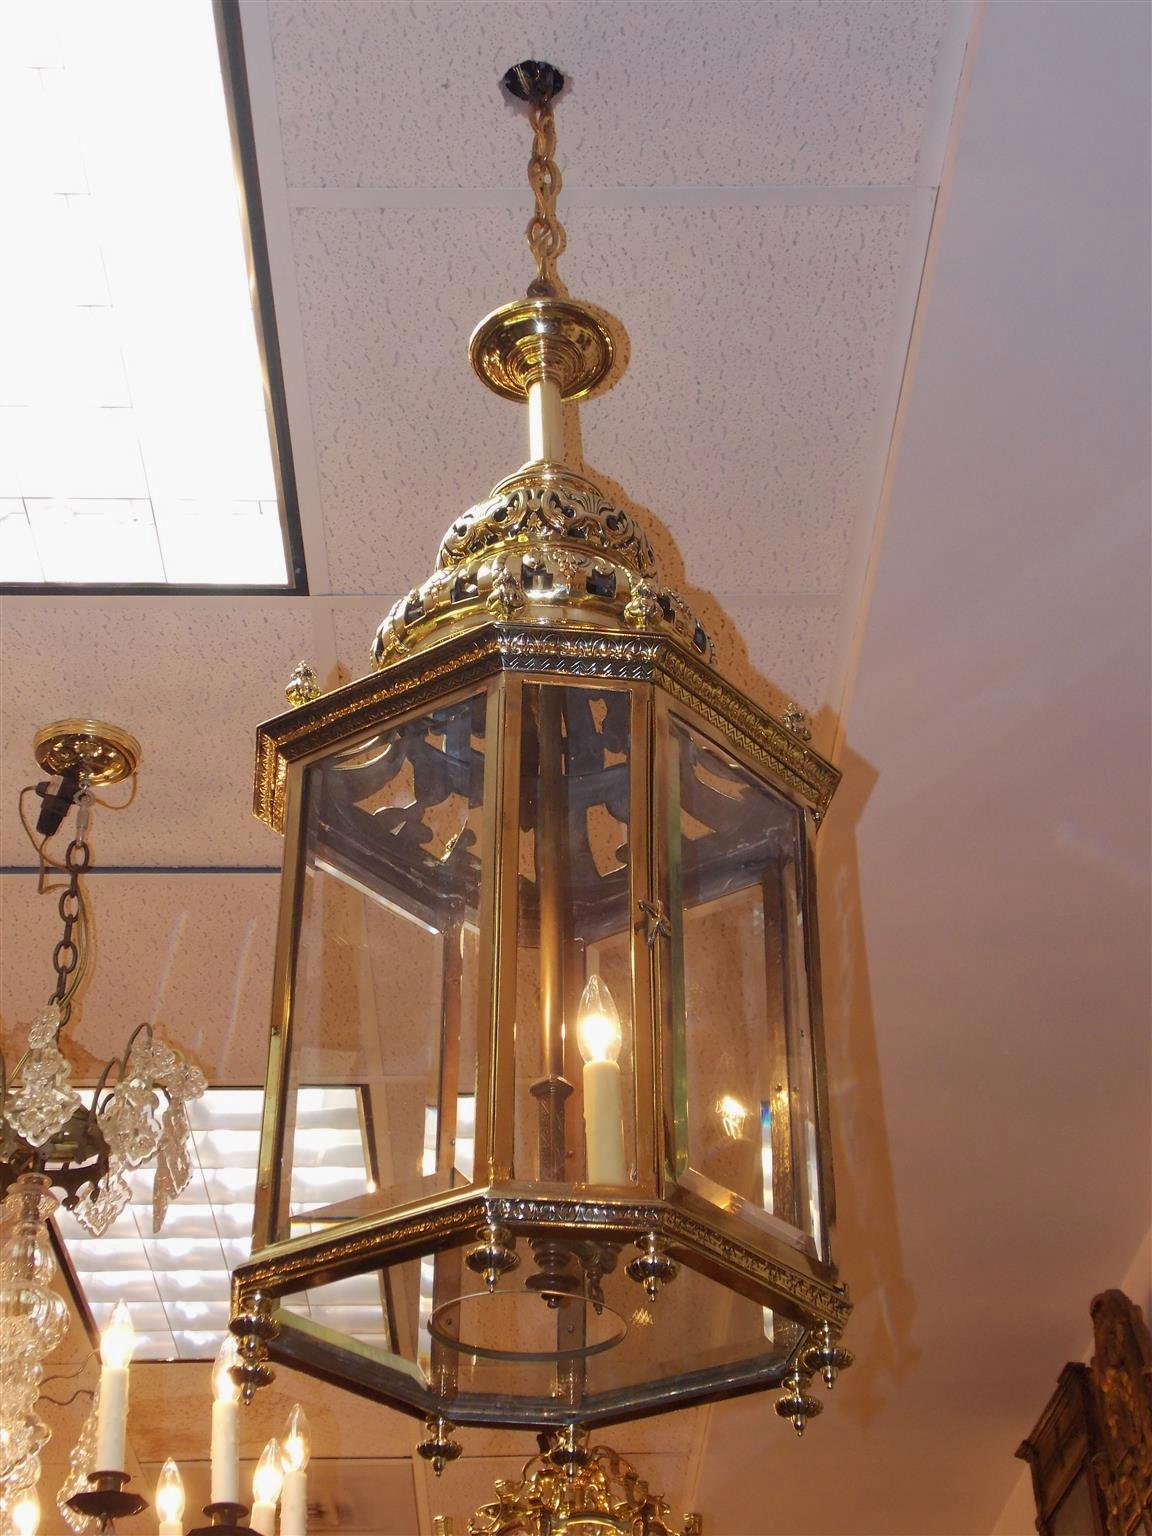 English brass octagon hanging hall lantern with a decorative centered bulbous two tiered beaded, chased, and pierced dome, beveled paneled glass with a single hinged door, eight upper floral finials with a filigree border, two light interior cluster